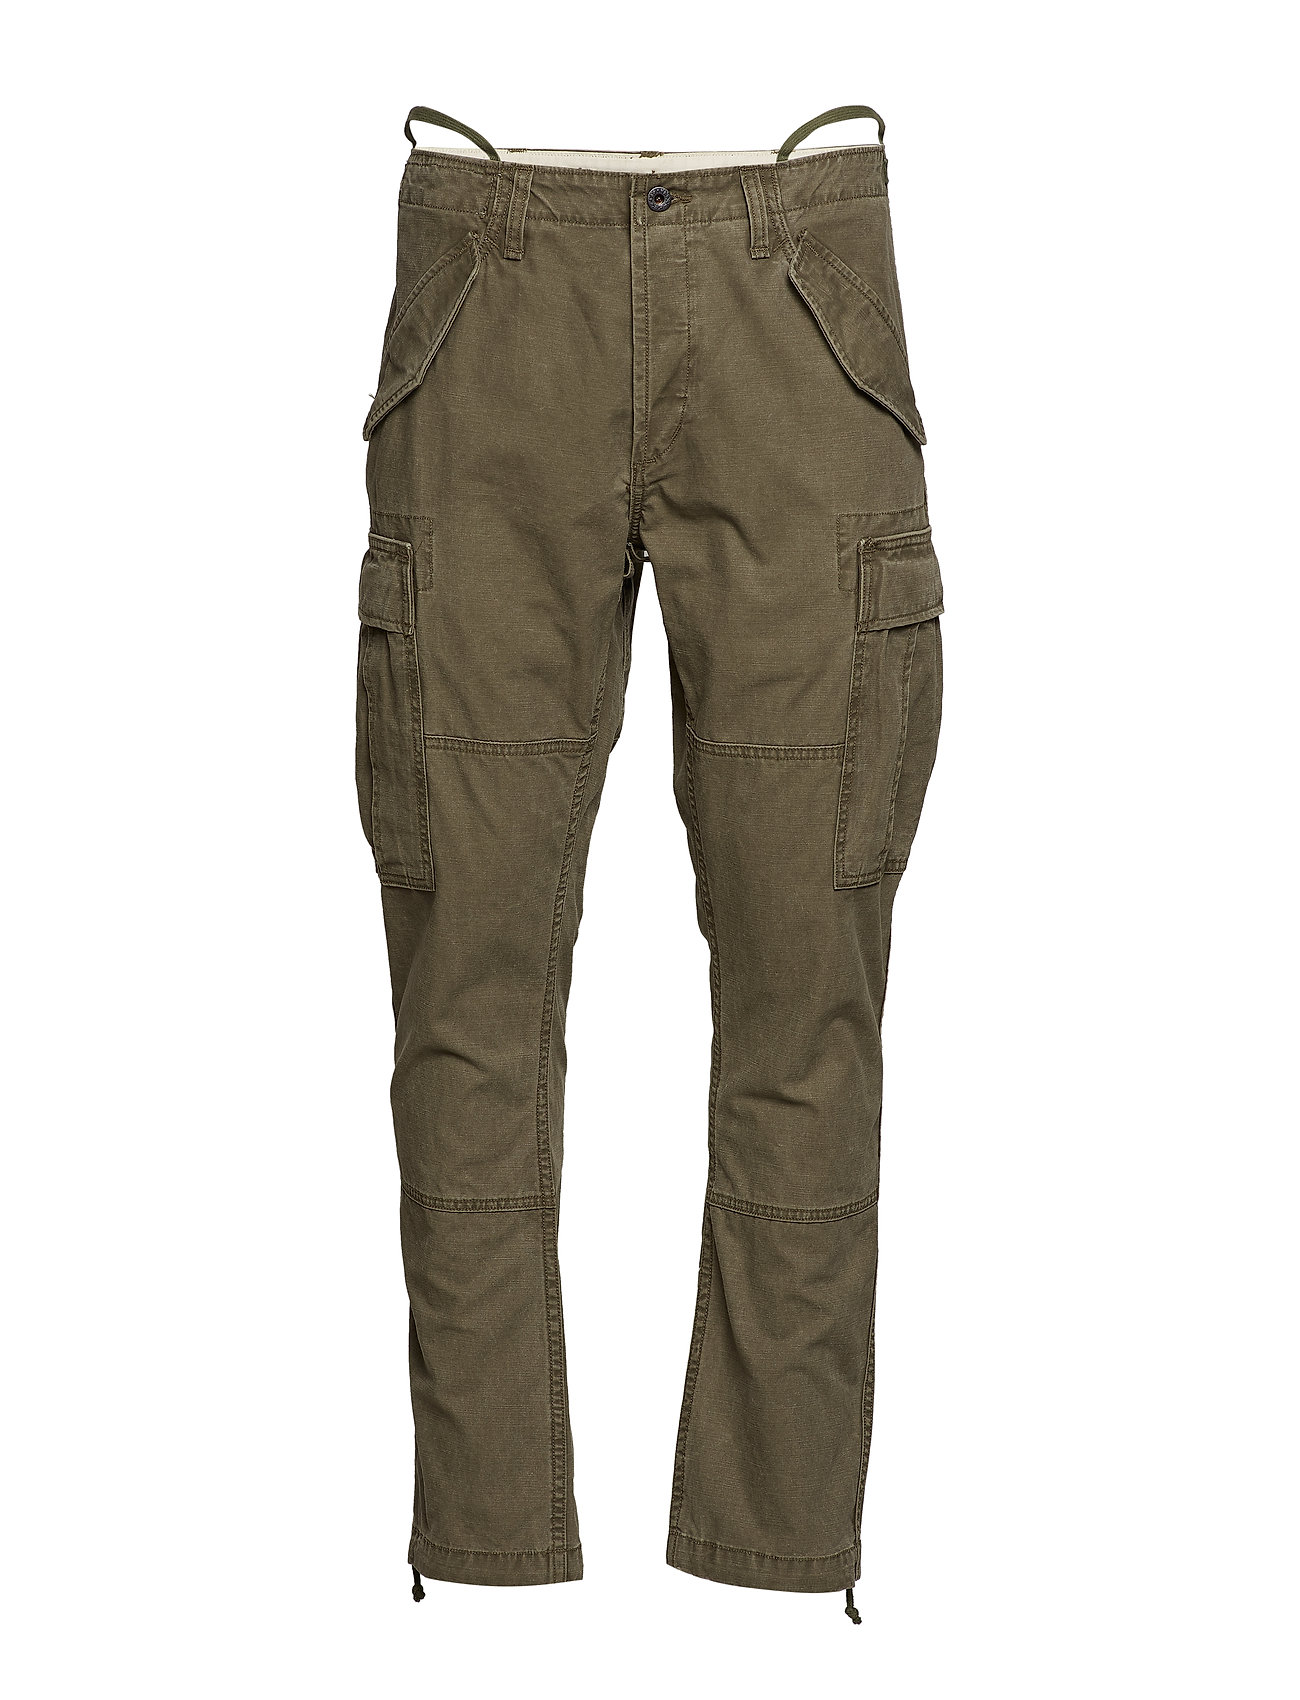 polo slim fit cargo pants